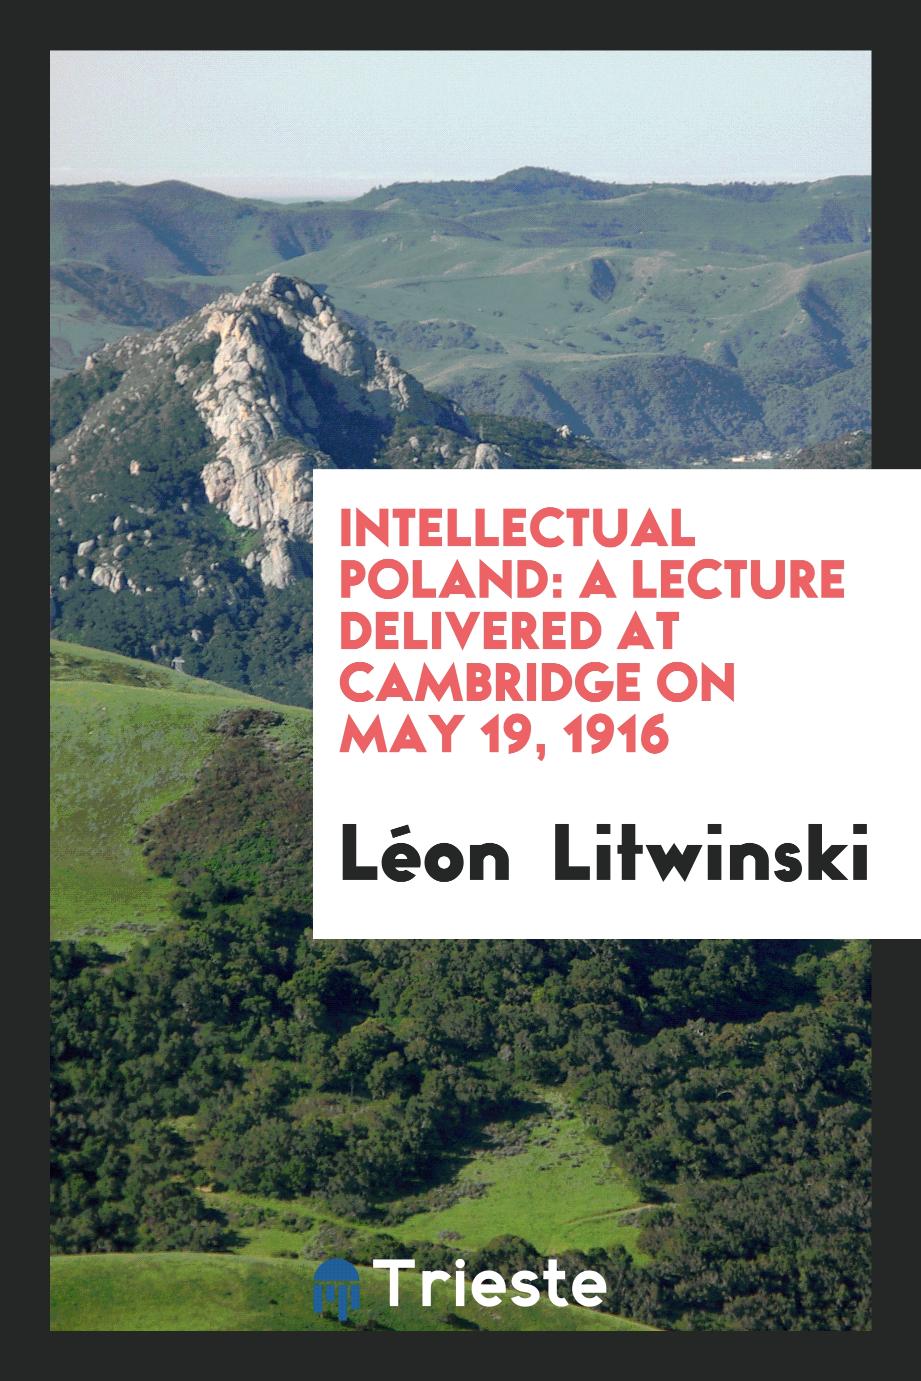 Intellectual Poland: A Lecture Delivered at Cambridge on May 19, 1916